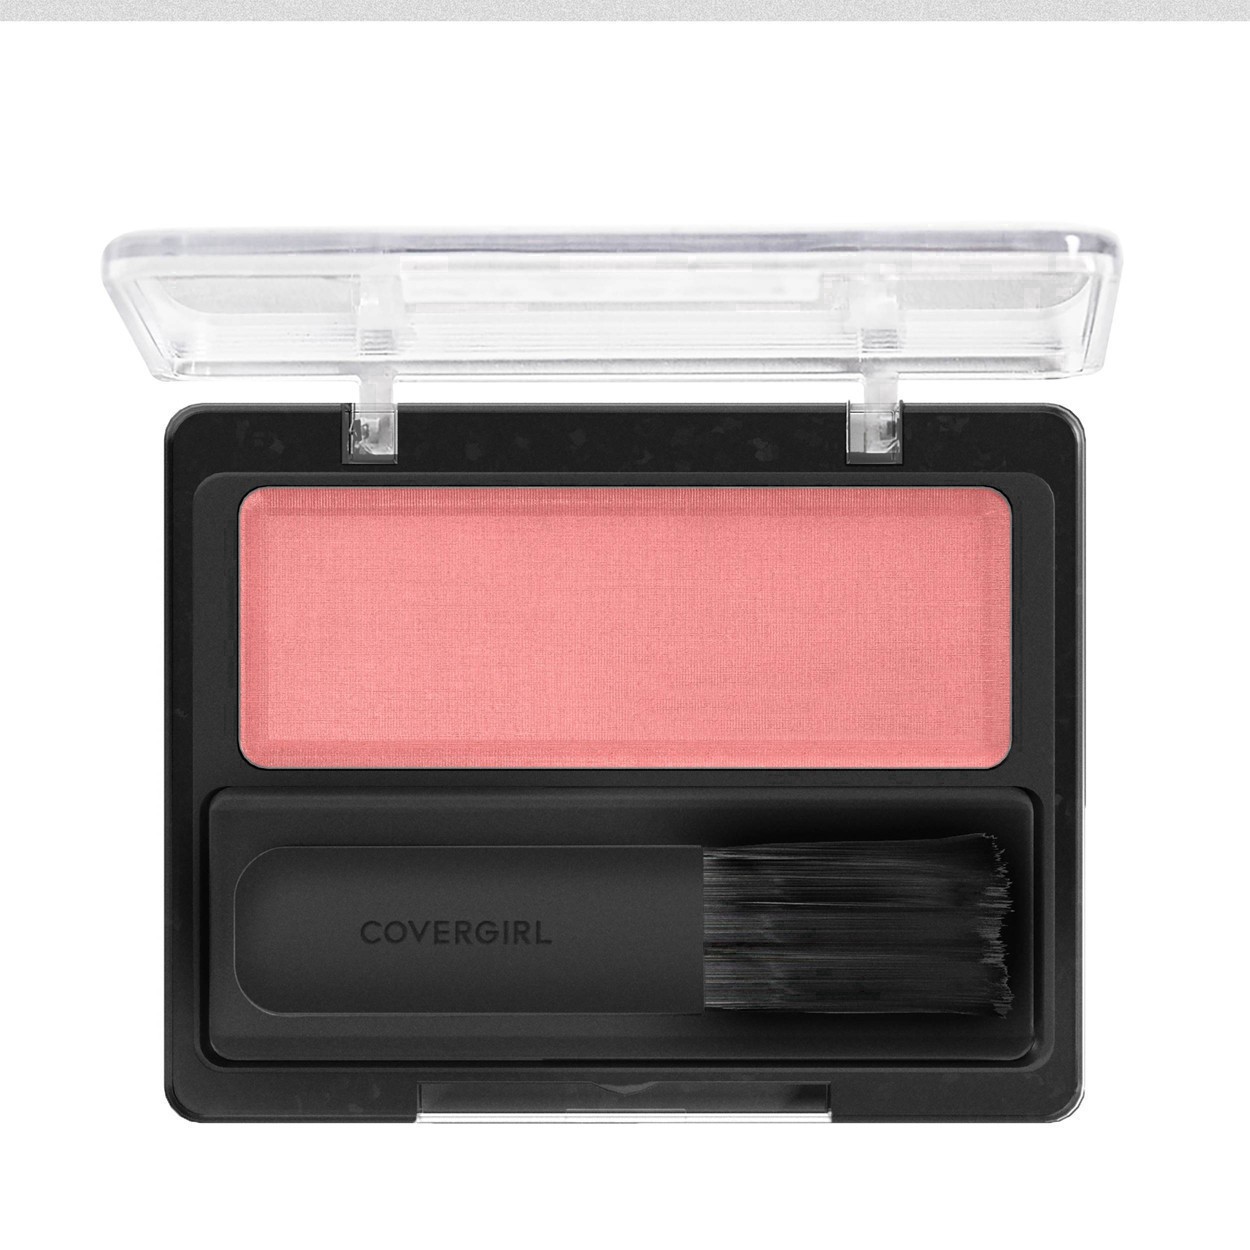 slide 26 of 42, COTY COVERGIRL COVERGIRL Classic Color Blush Rose Silk, 1 ct